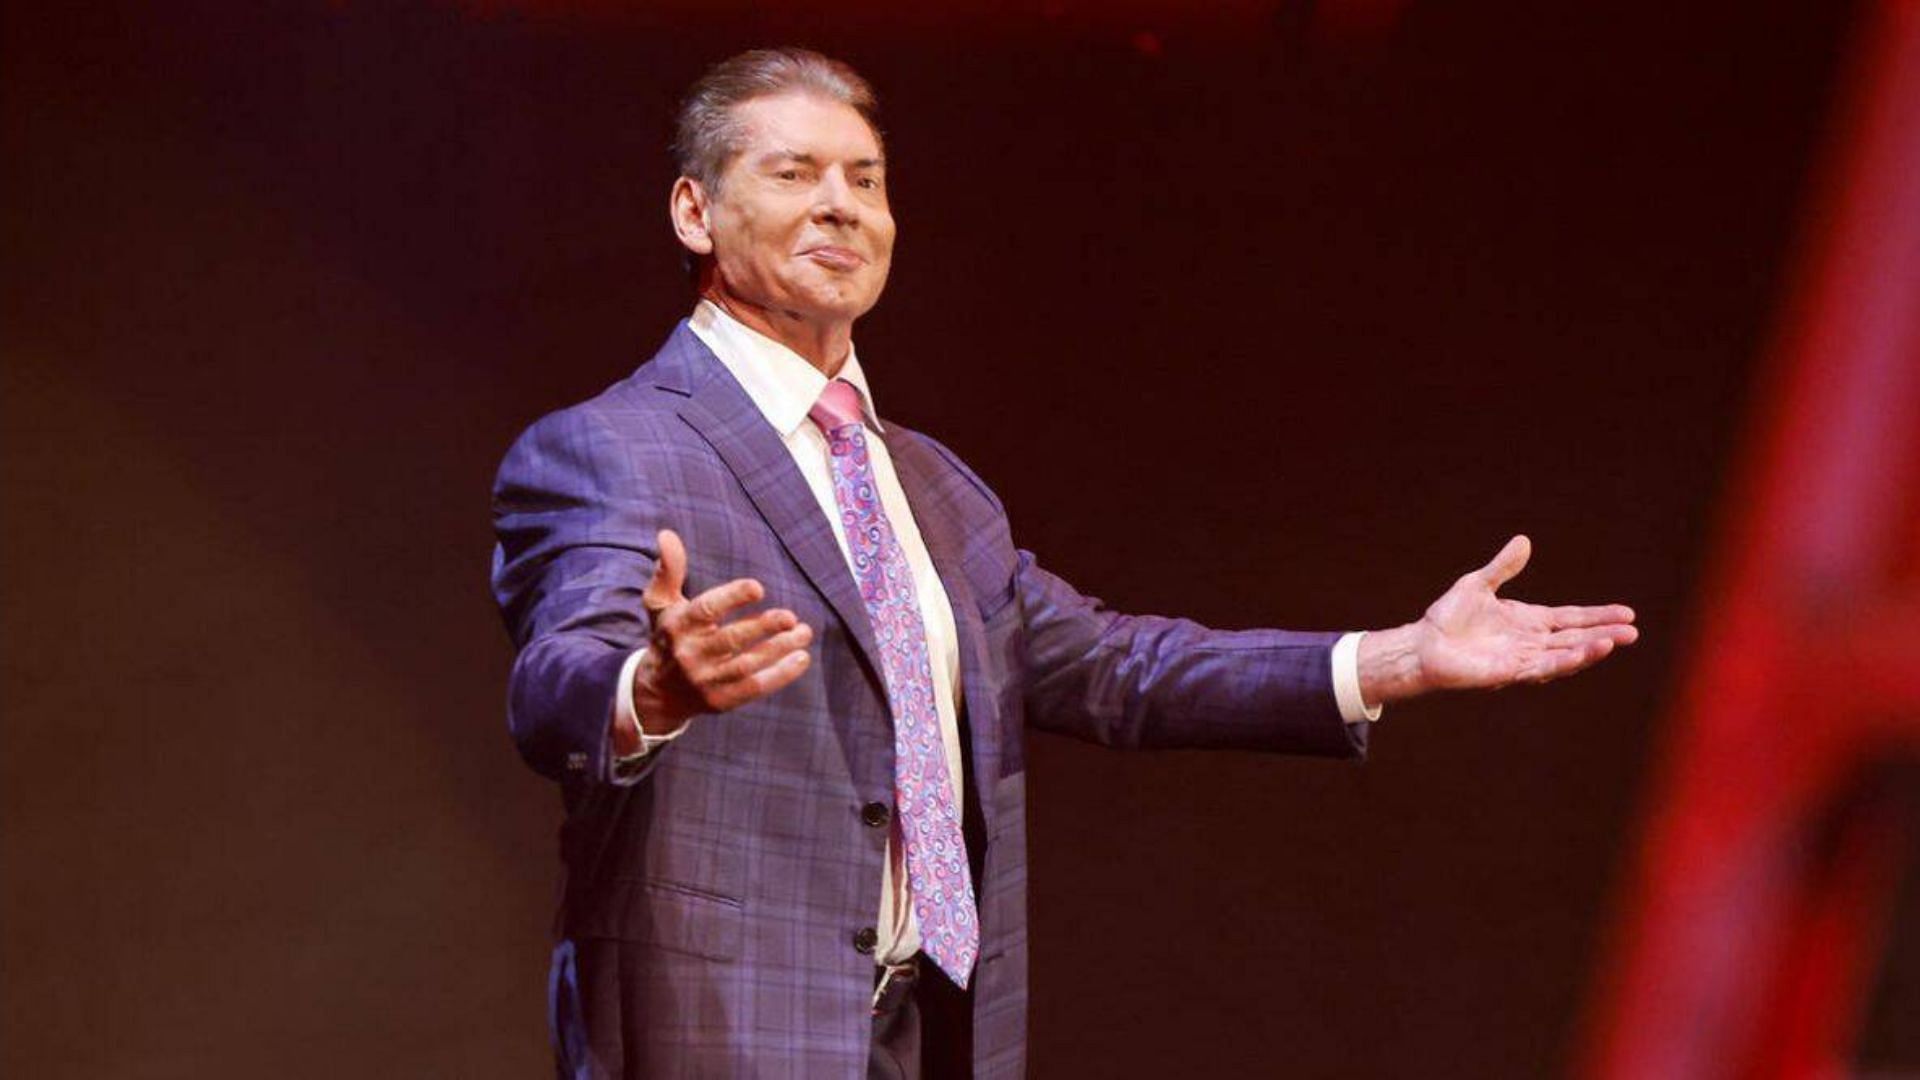 Vince McMahon was the founder of WWE